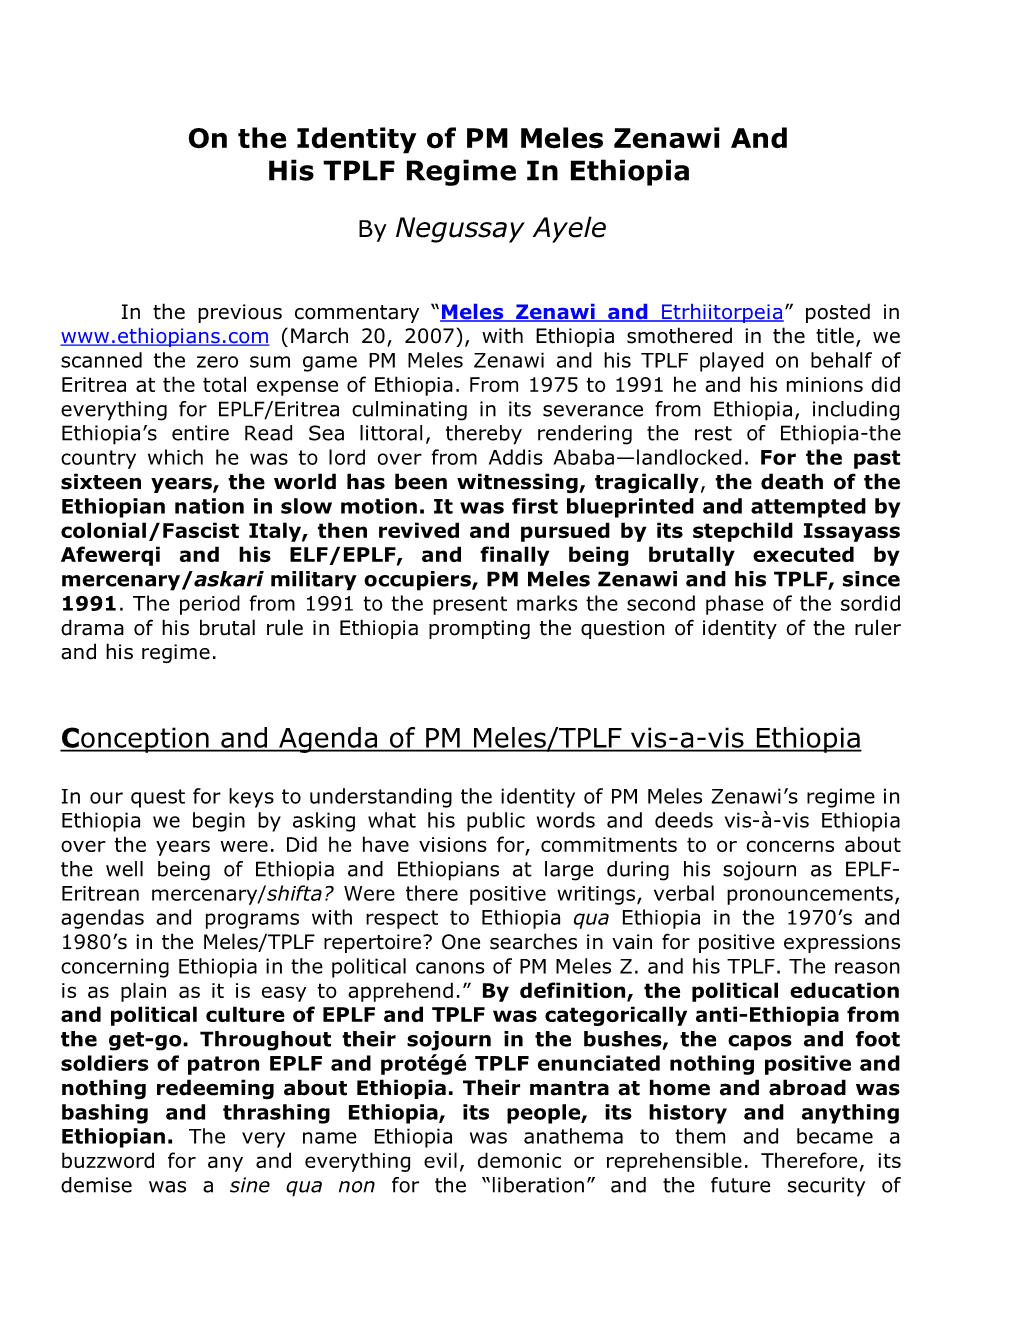 On the Identity of PM Meles Zenawi and His TPLF Regime in Ethiopia